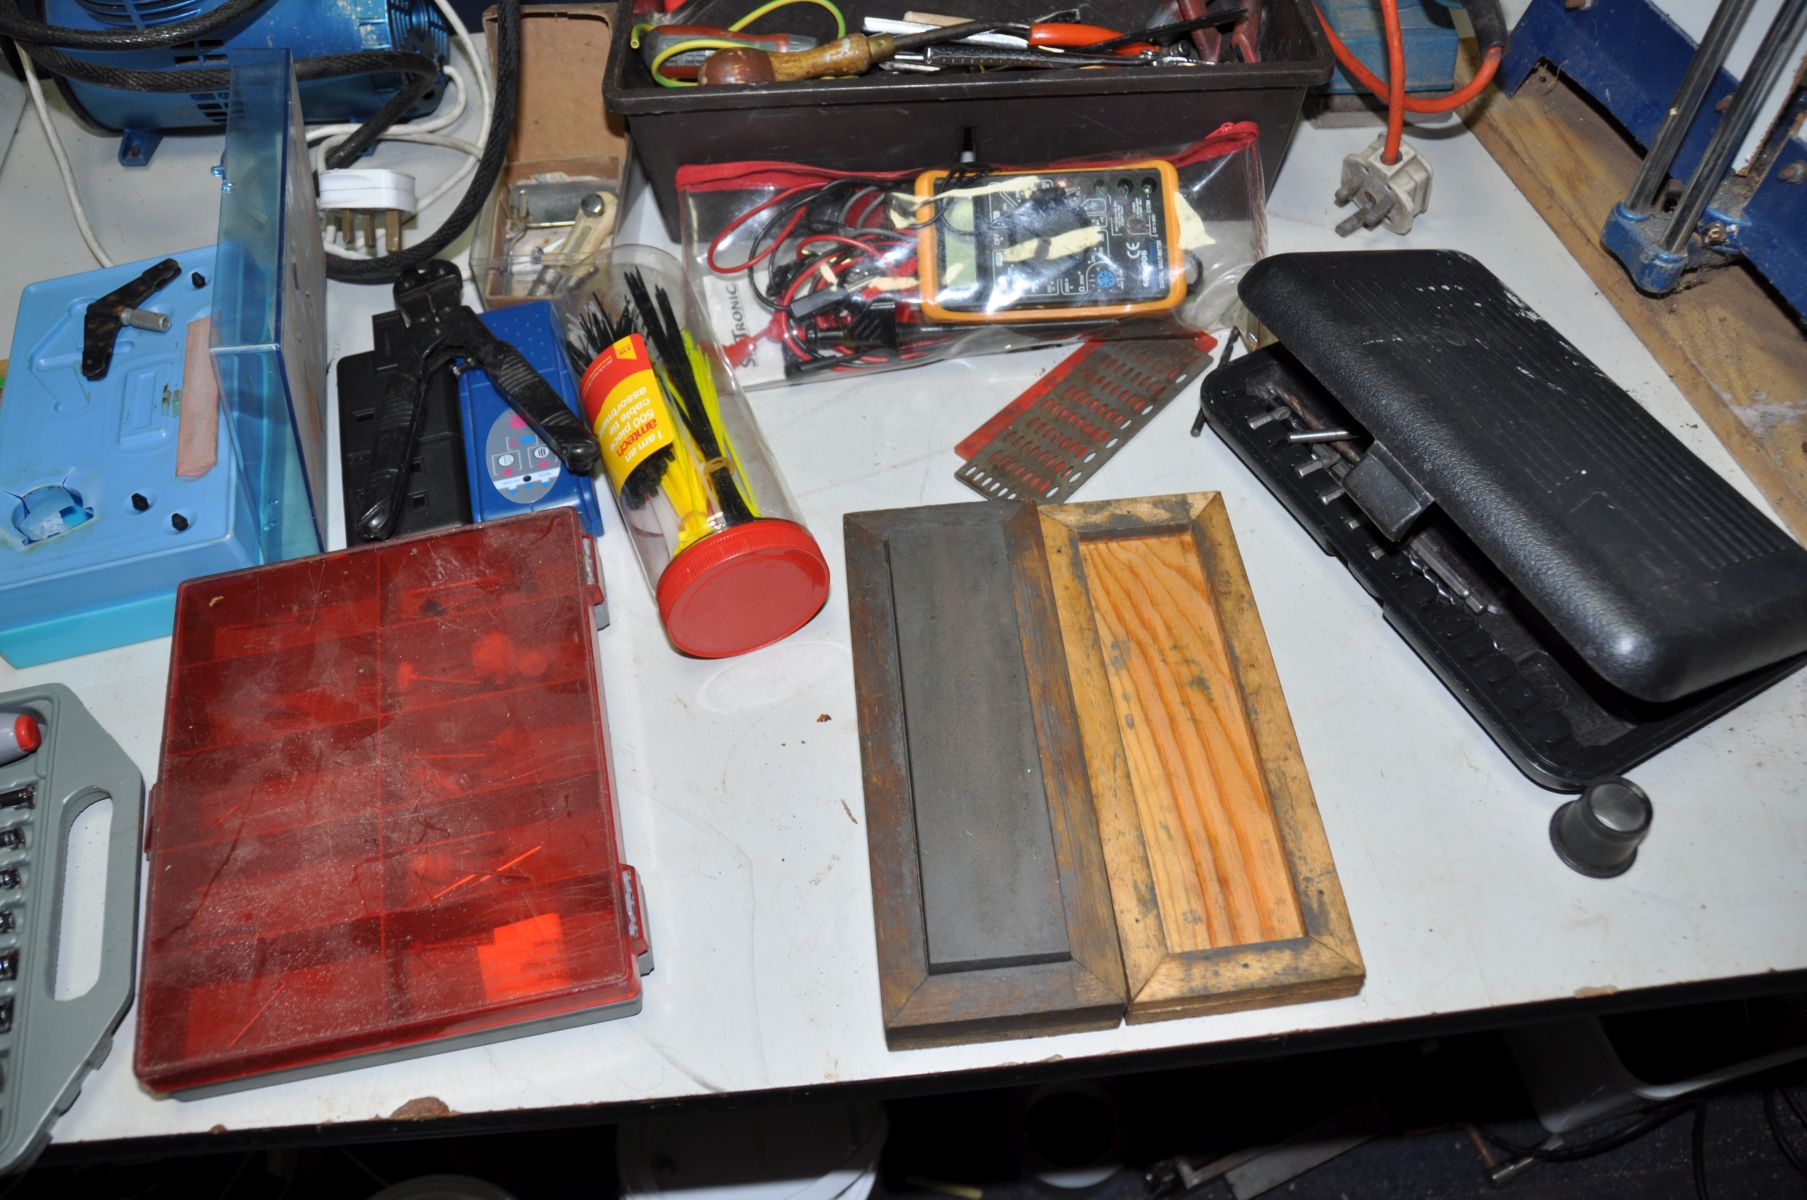 A TRAY CONTAINING HANDTOOLS AND A MINI COMPRESSOR (untested) including a multimeter, screwdrivers, - Image 6 of 6